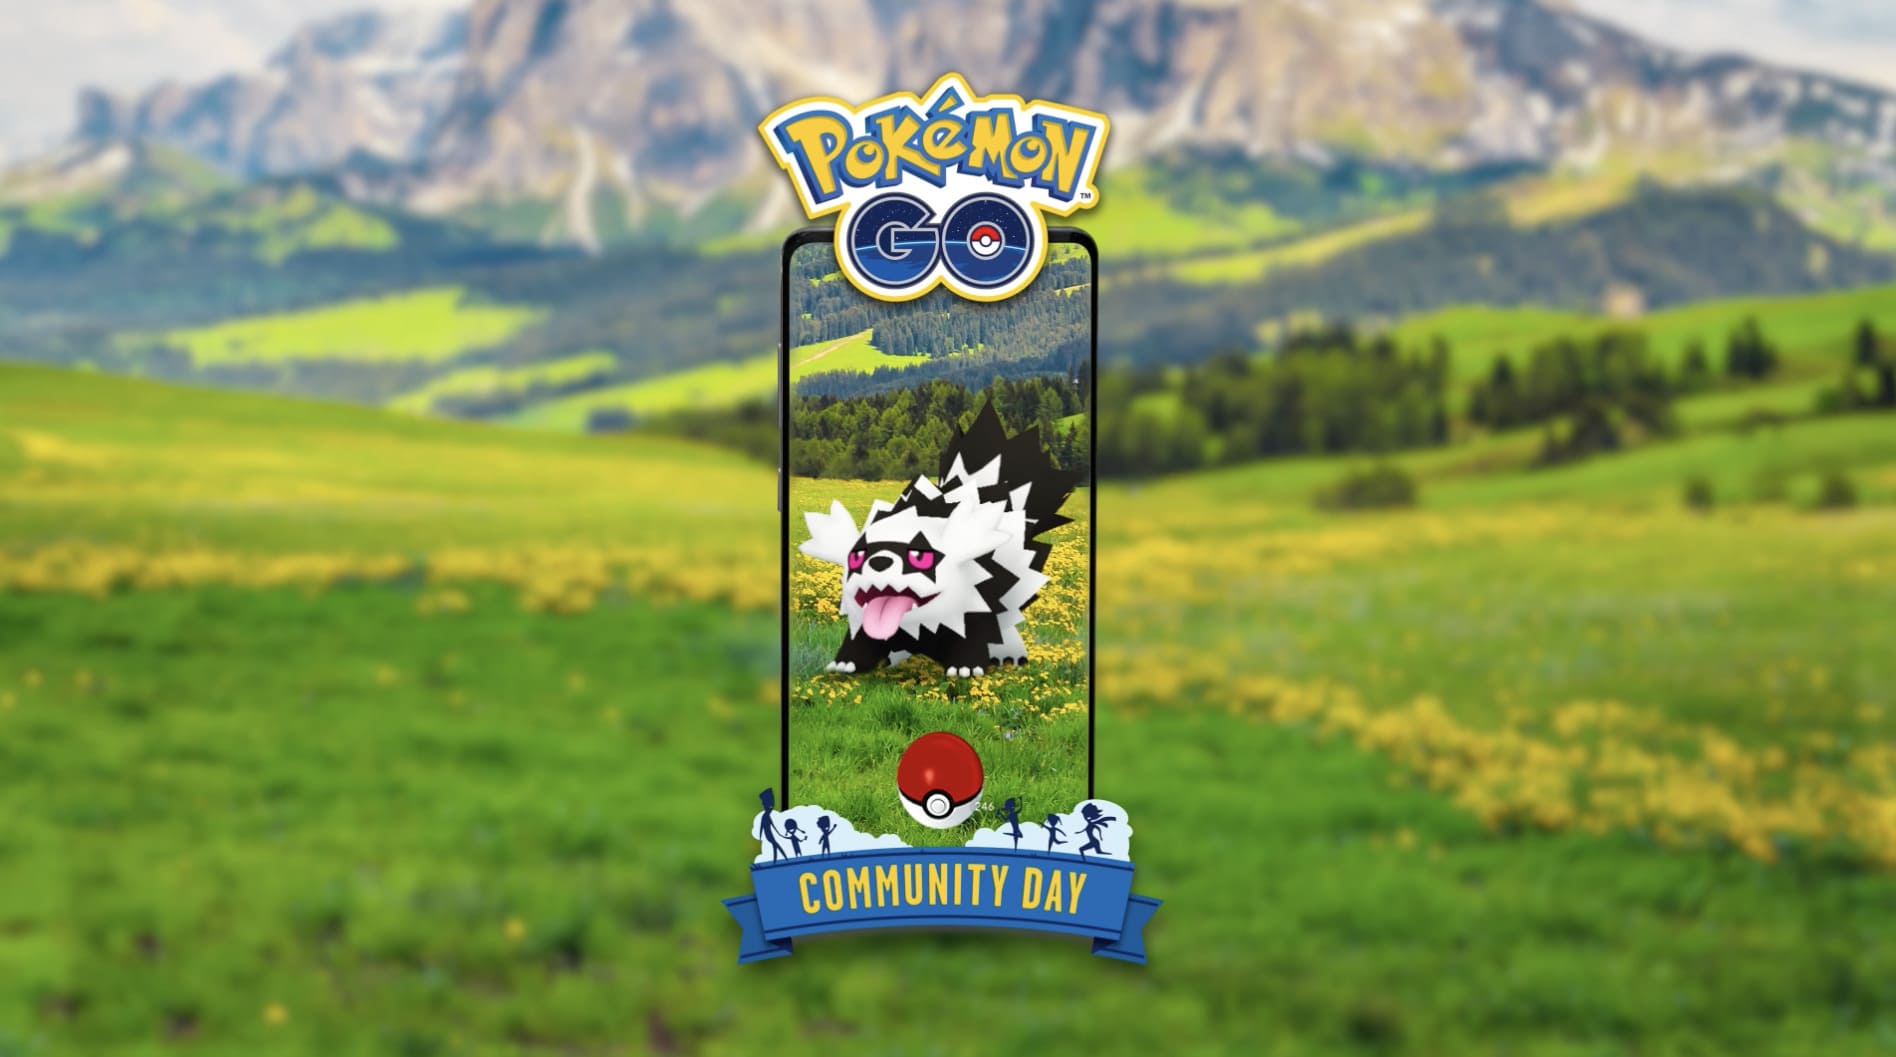 Pokémon GO users ask that the Community Day schedule be readjusted due to high temperatures